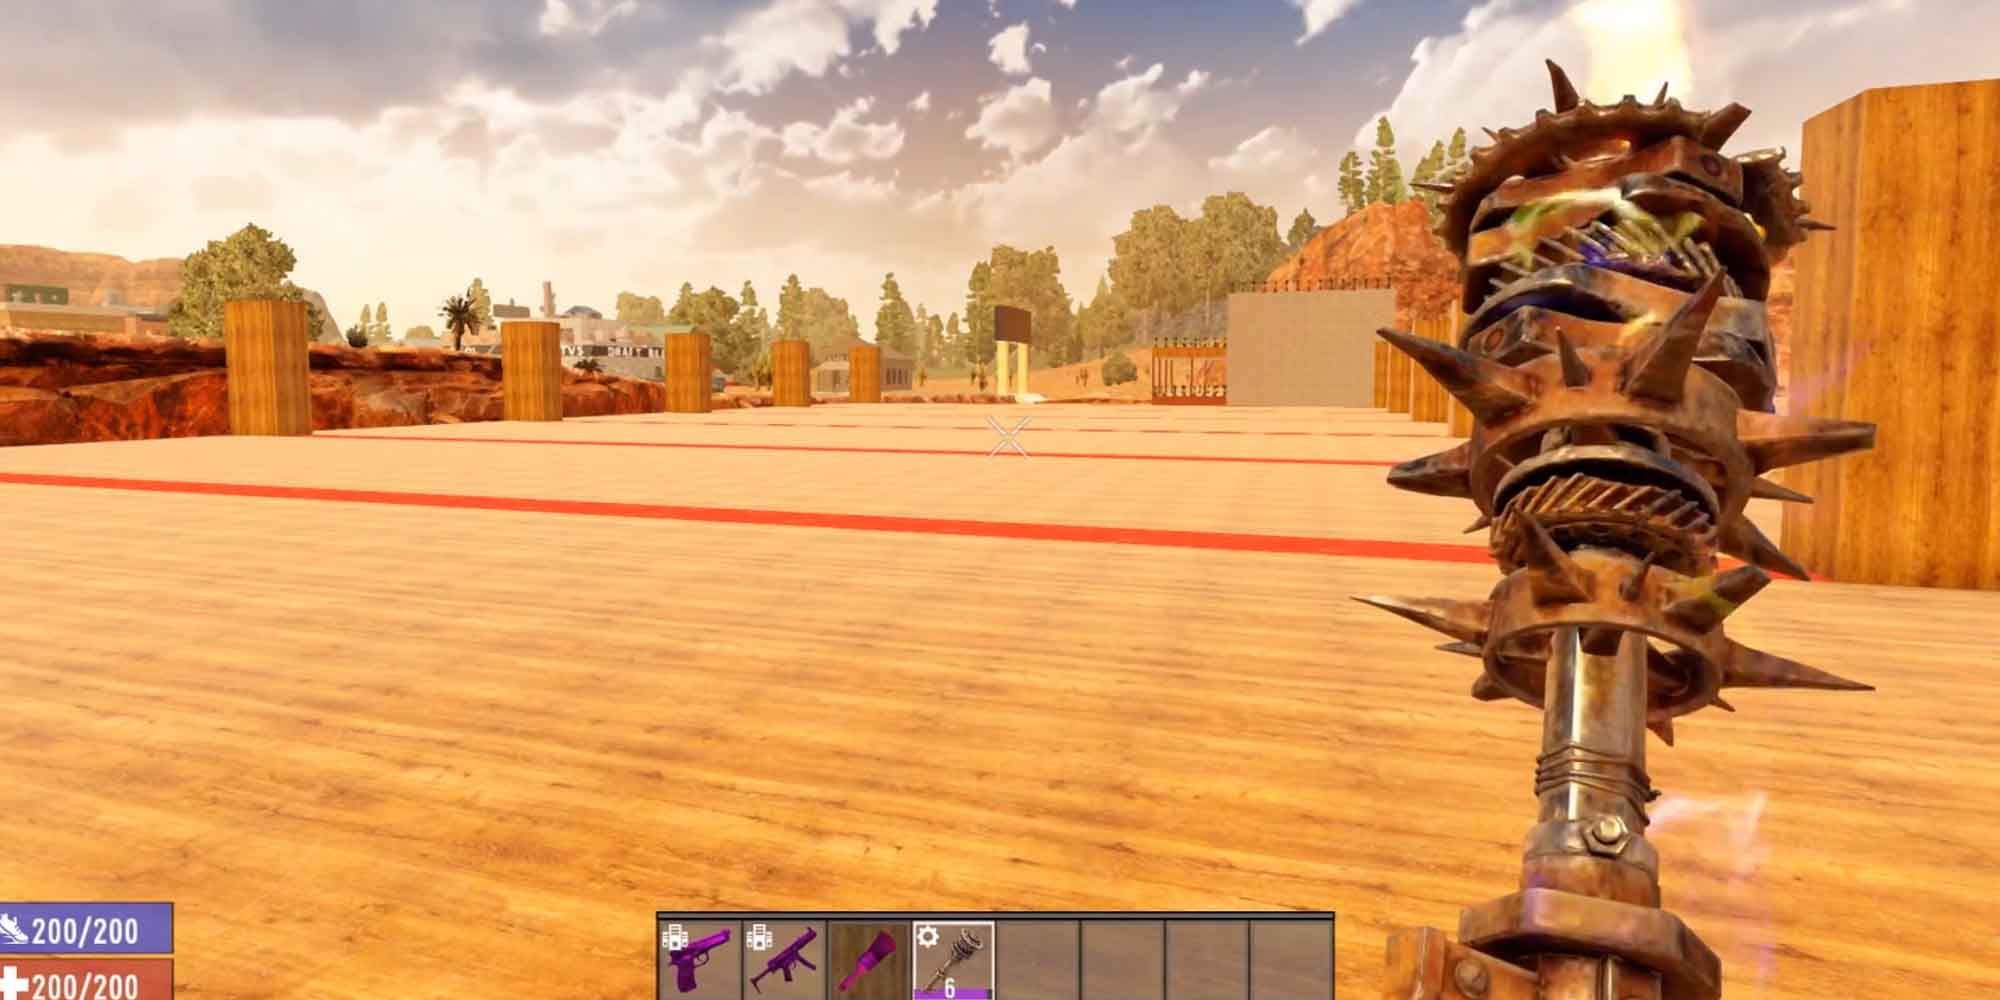 A modded Steel Club in 7 Days to Die